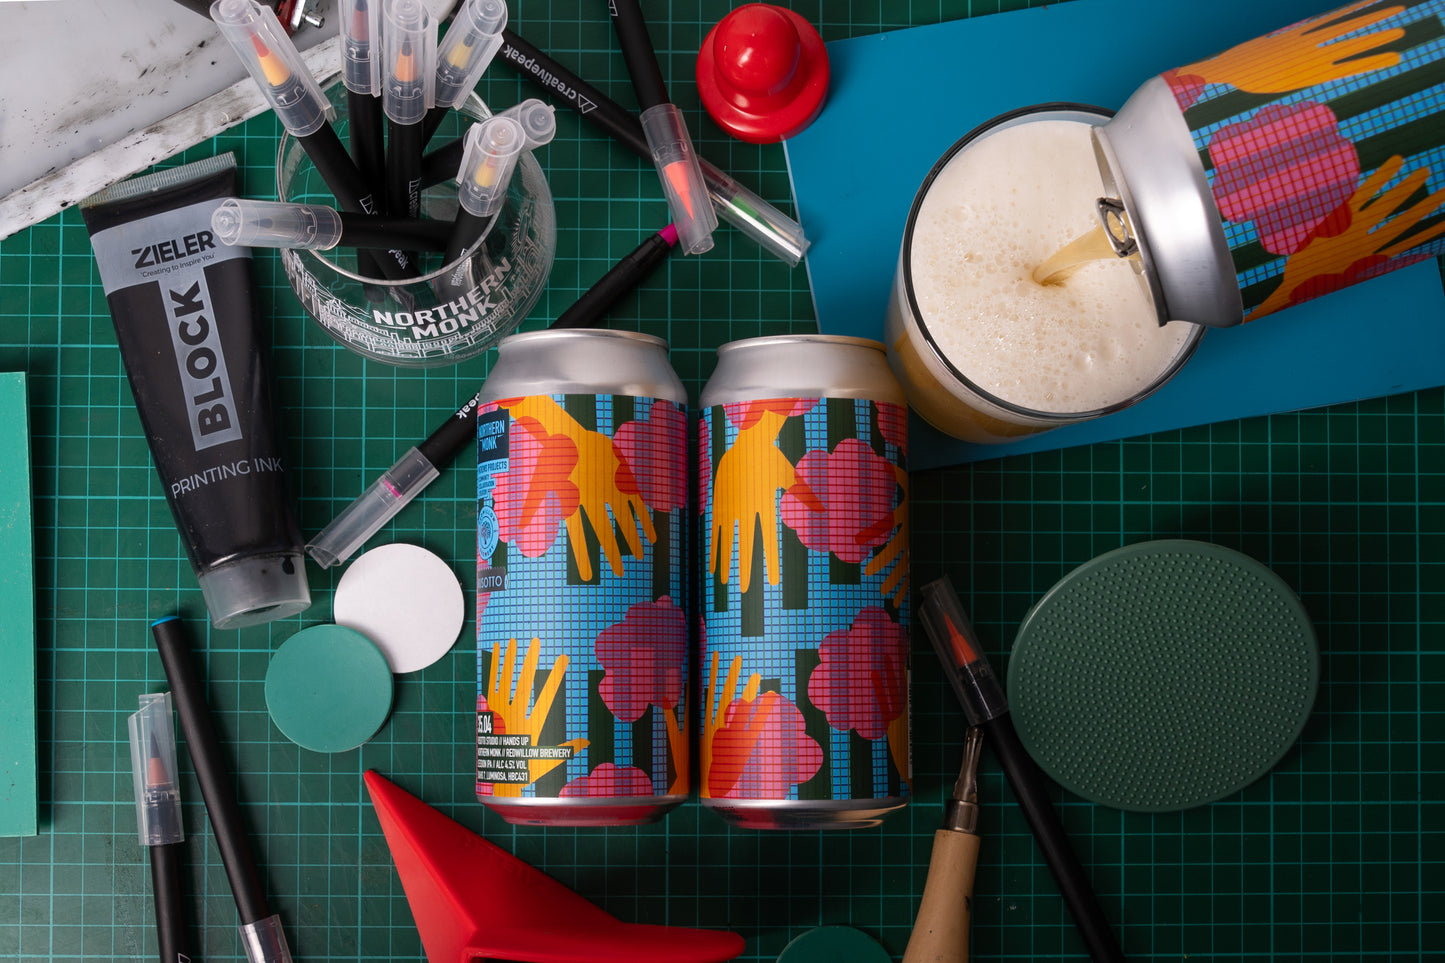 4 PACK // 35.04 RISOTTO STUDIOS // HANDS UP // REDWILLOW // SESSION IPA